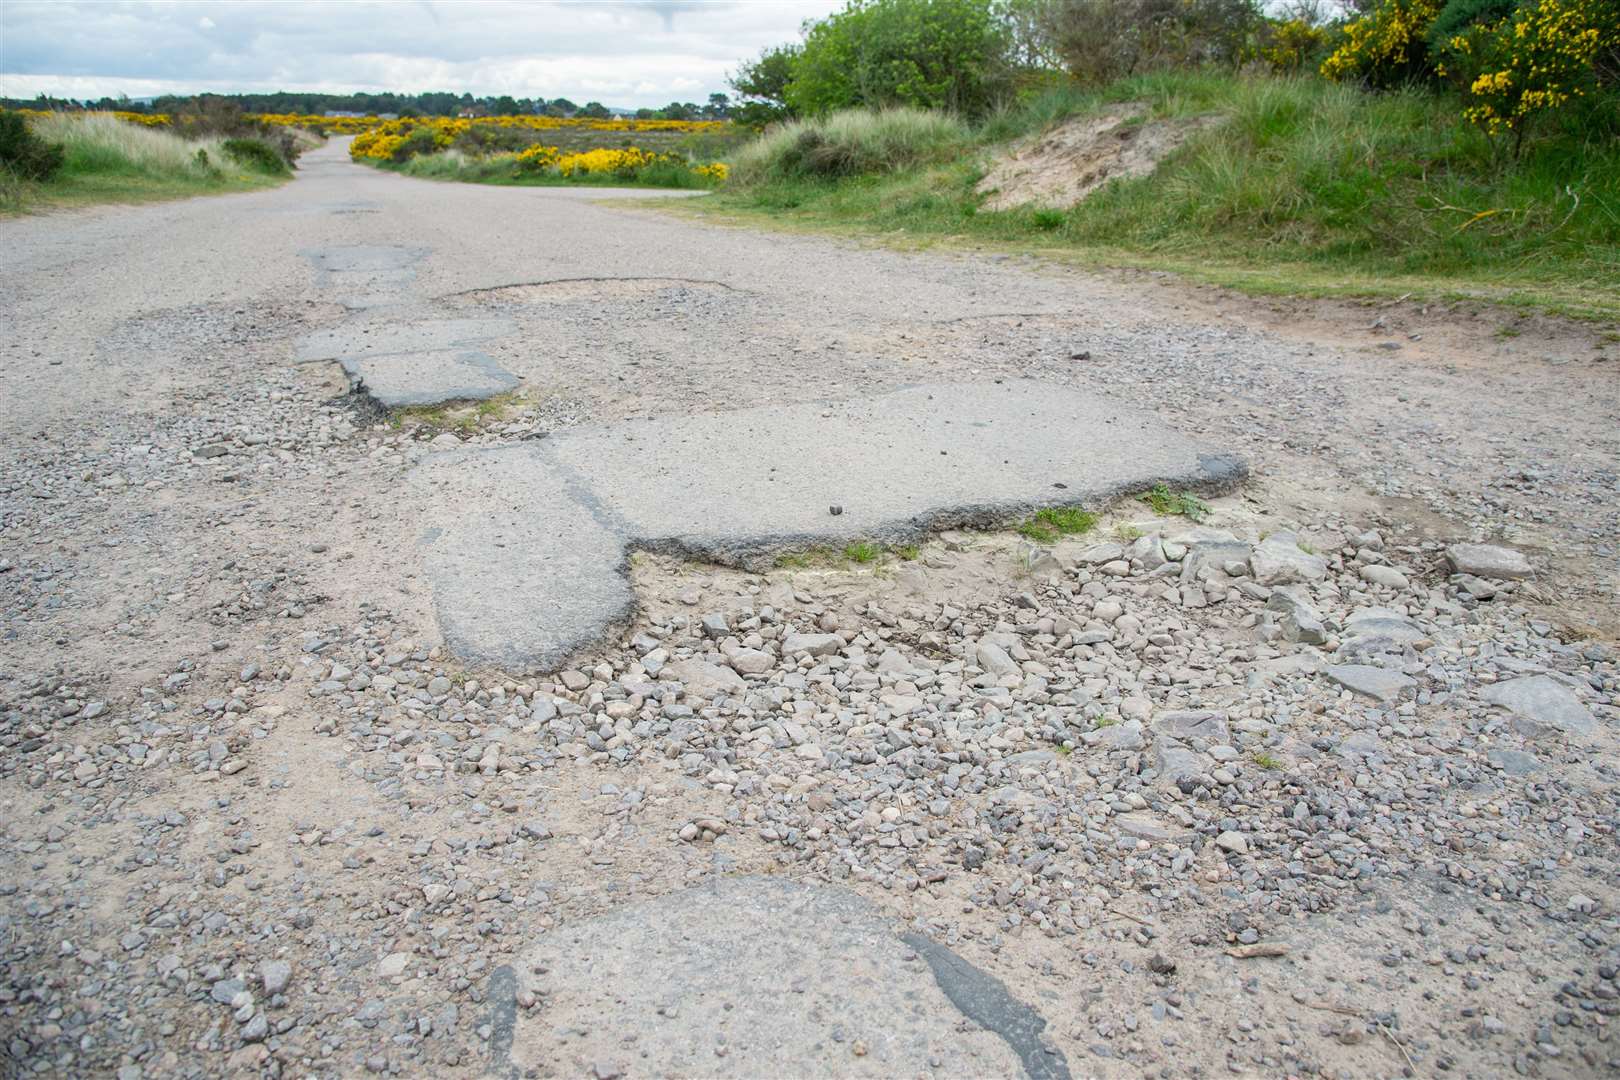 The Dunes Road has deteriorated over the years.